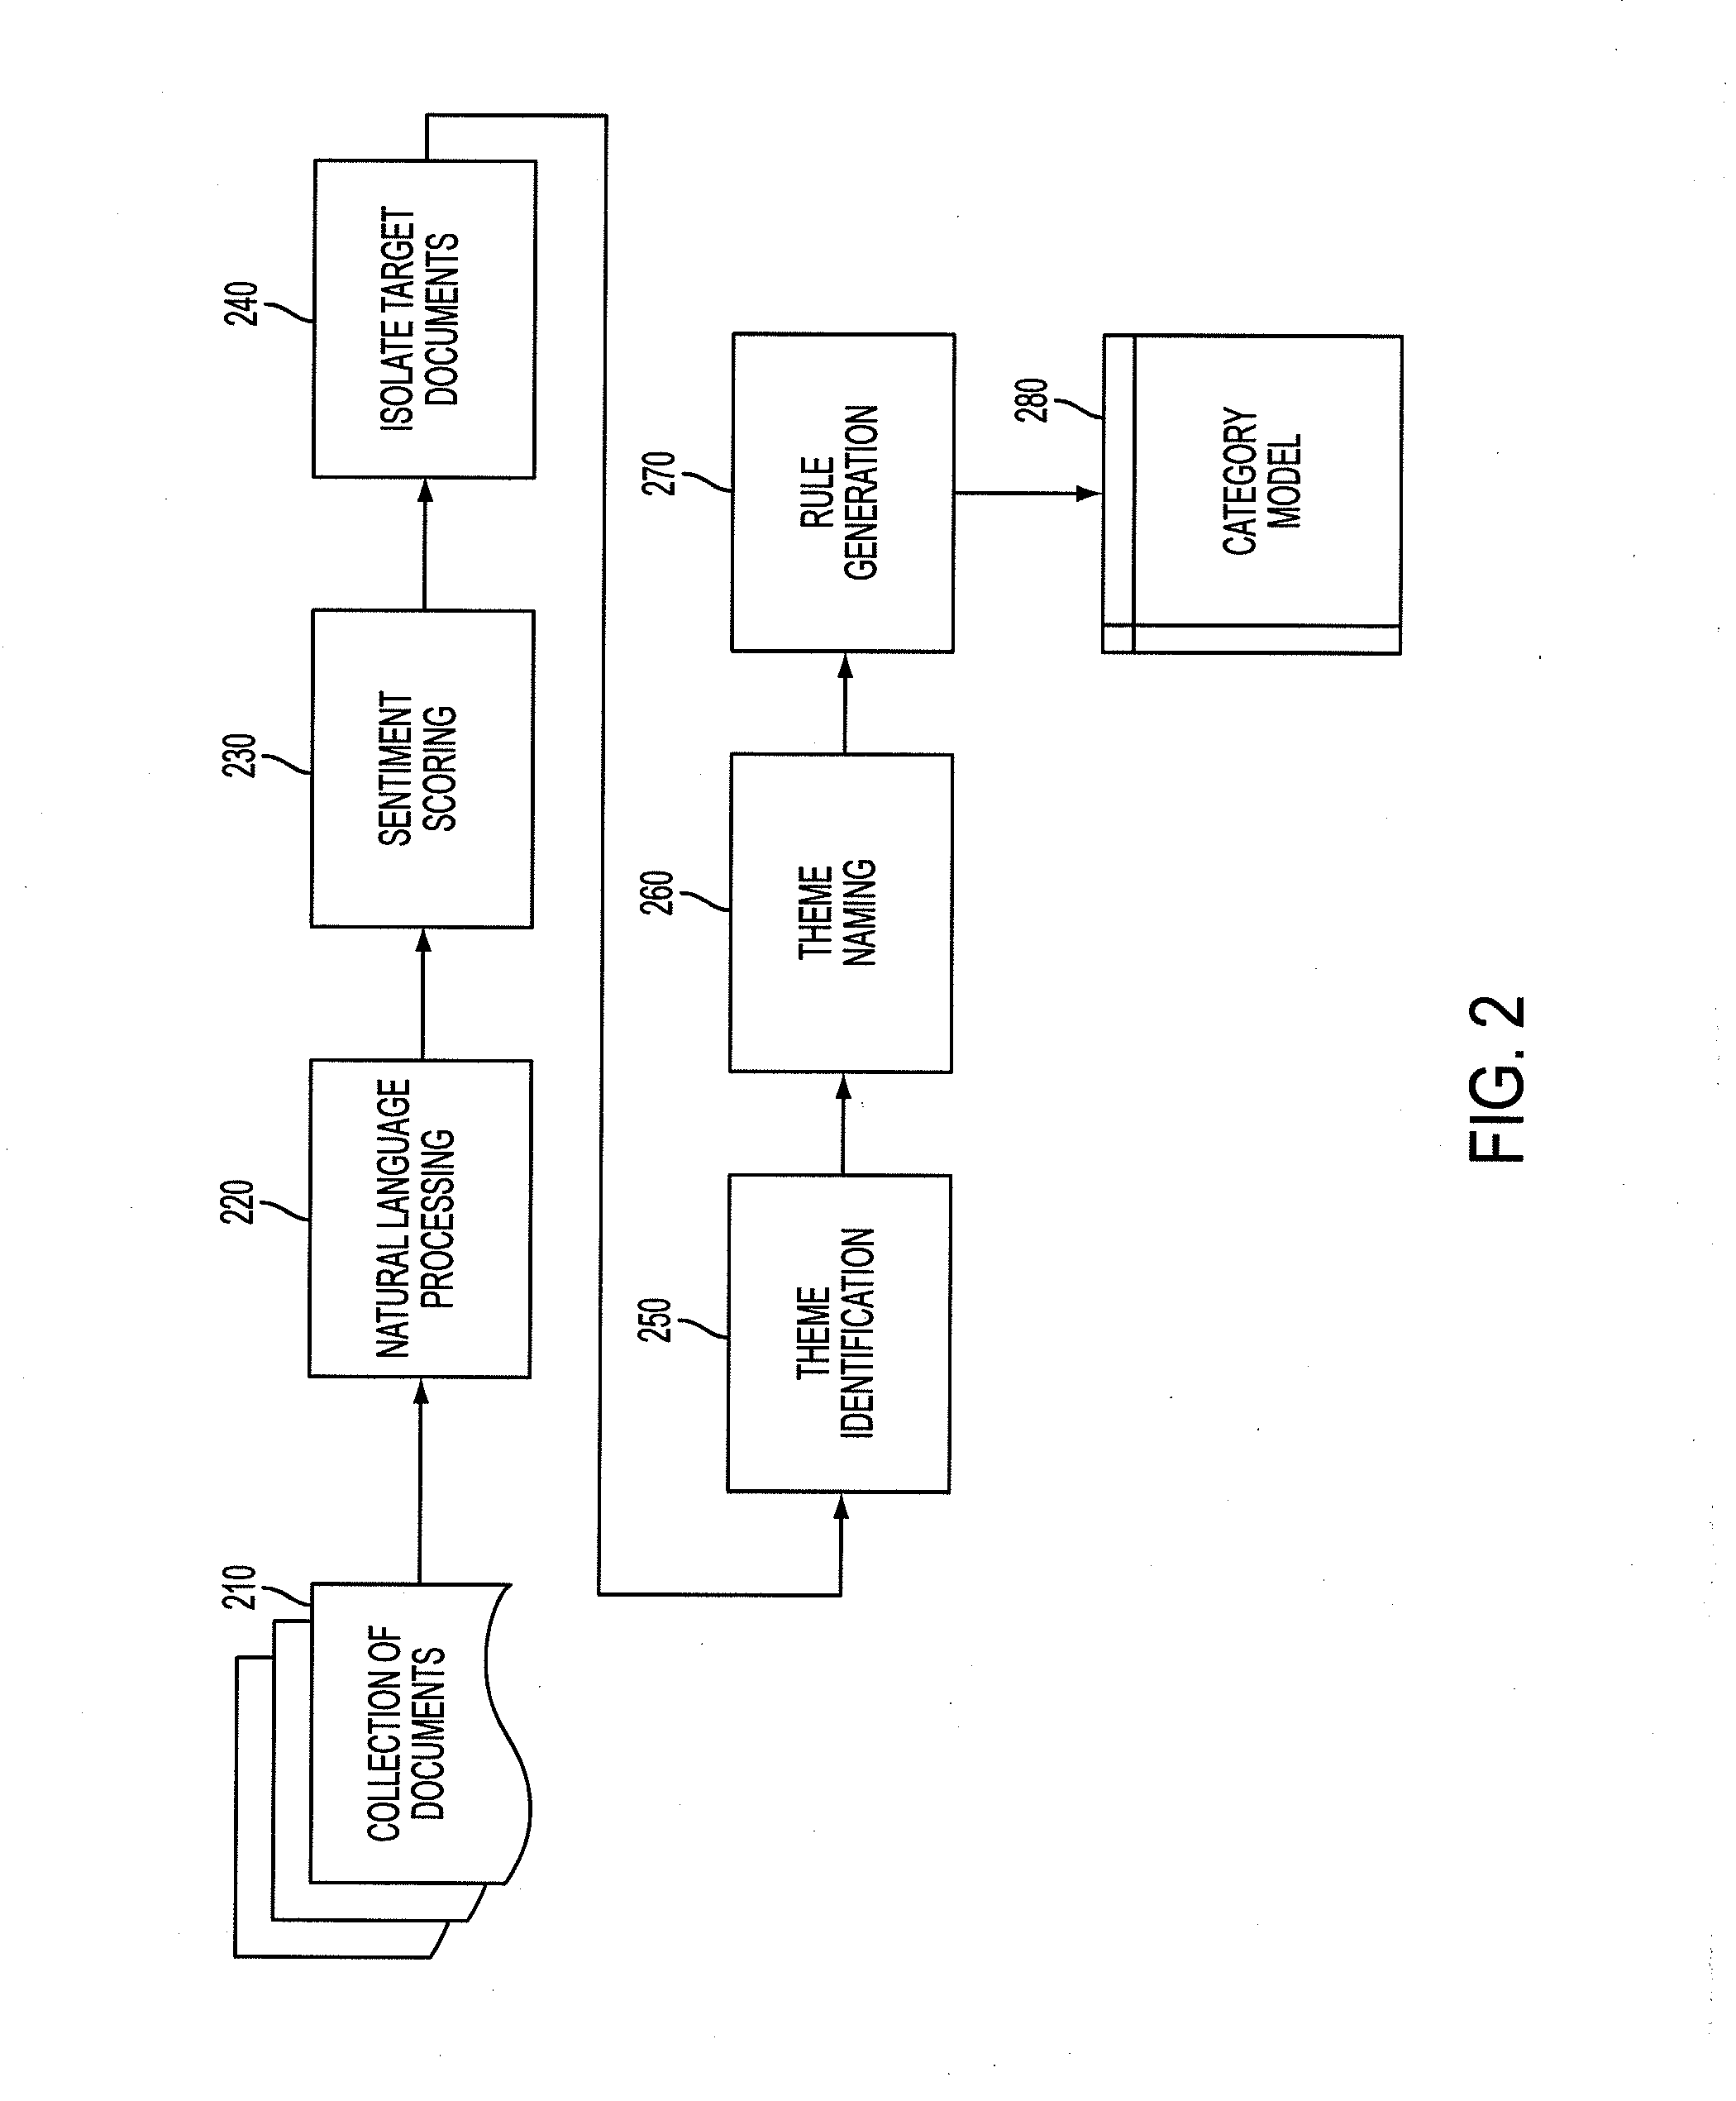 Apparatus for automatic theme detection from unstructured data